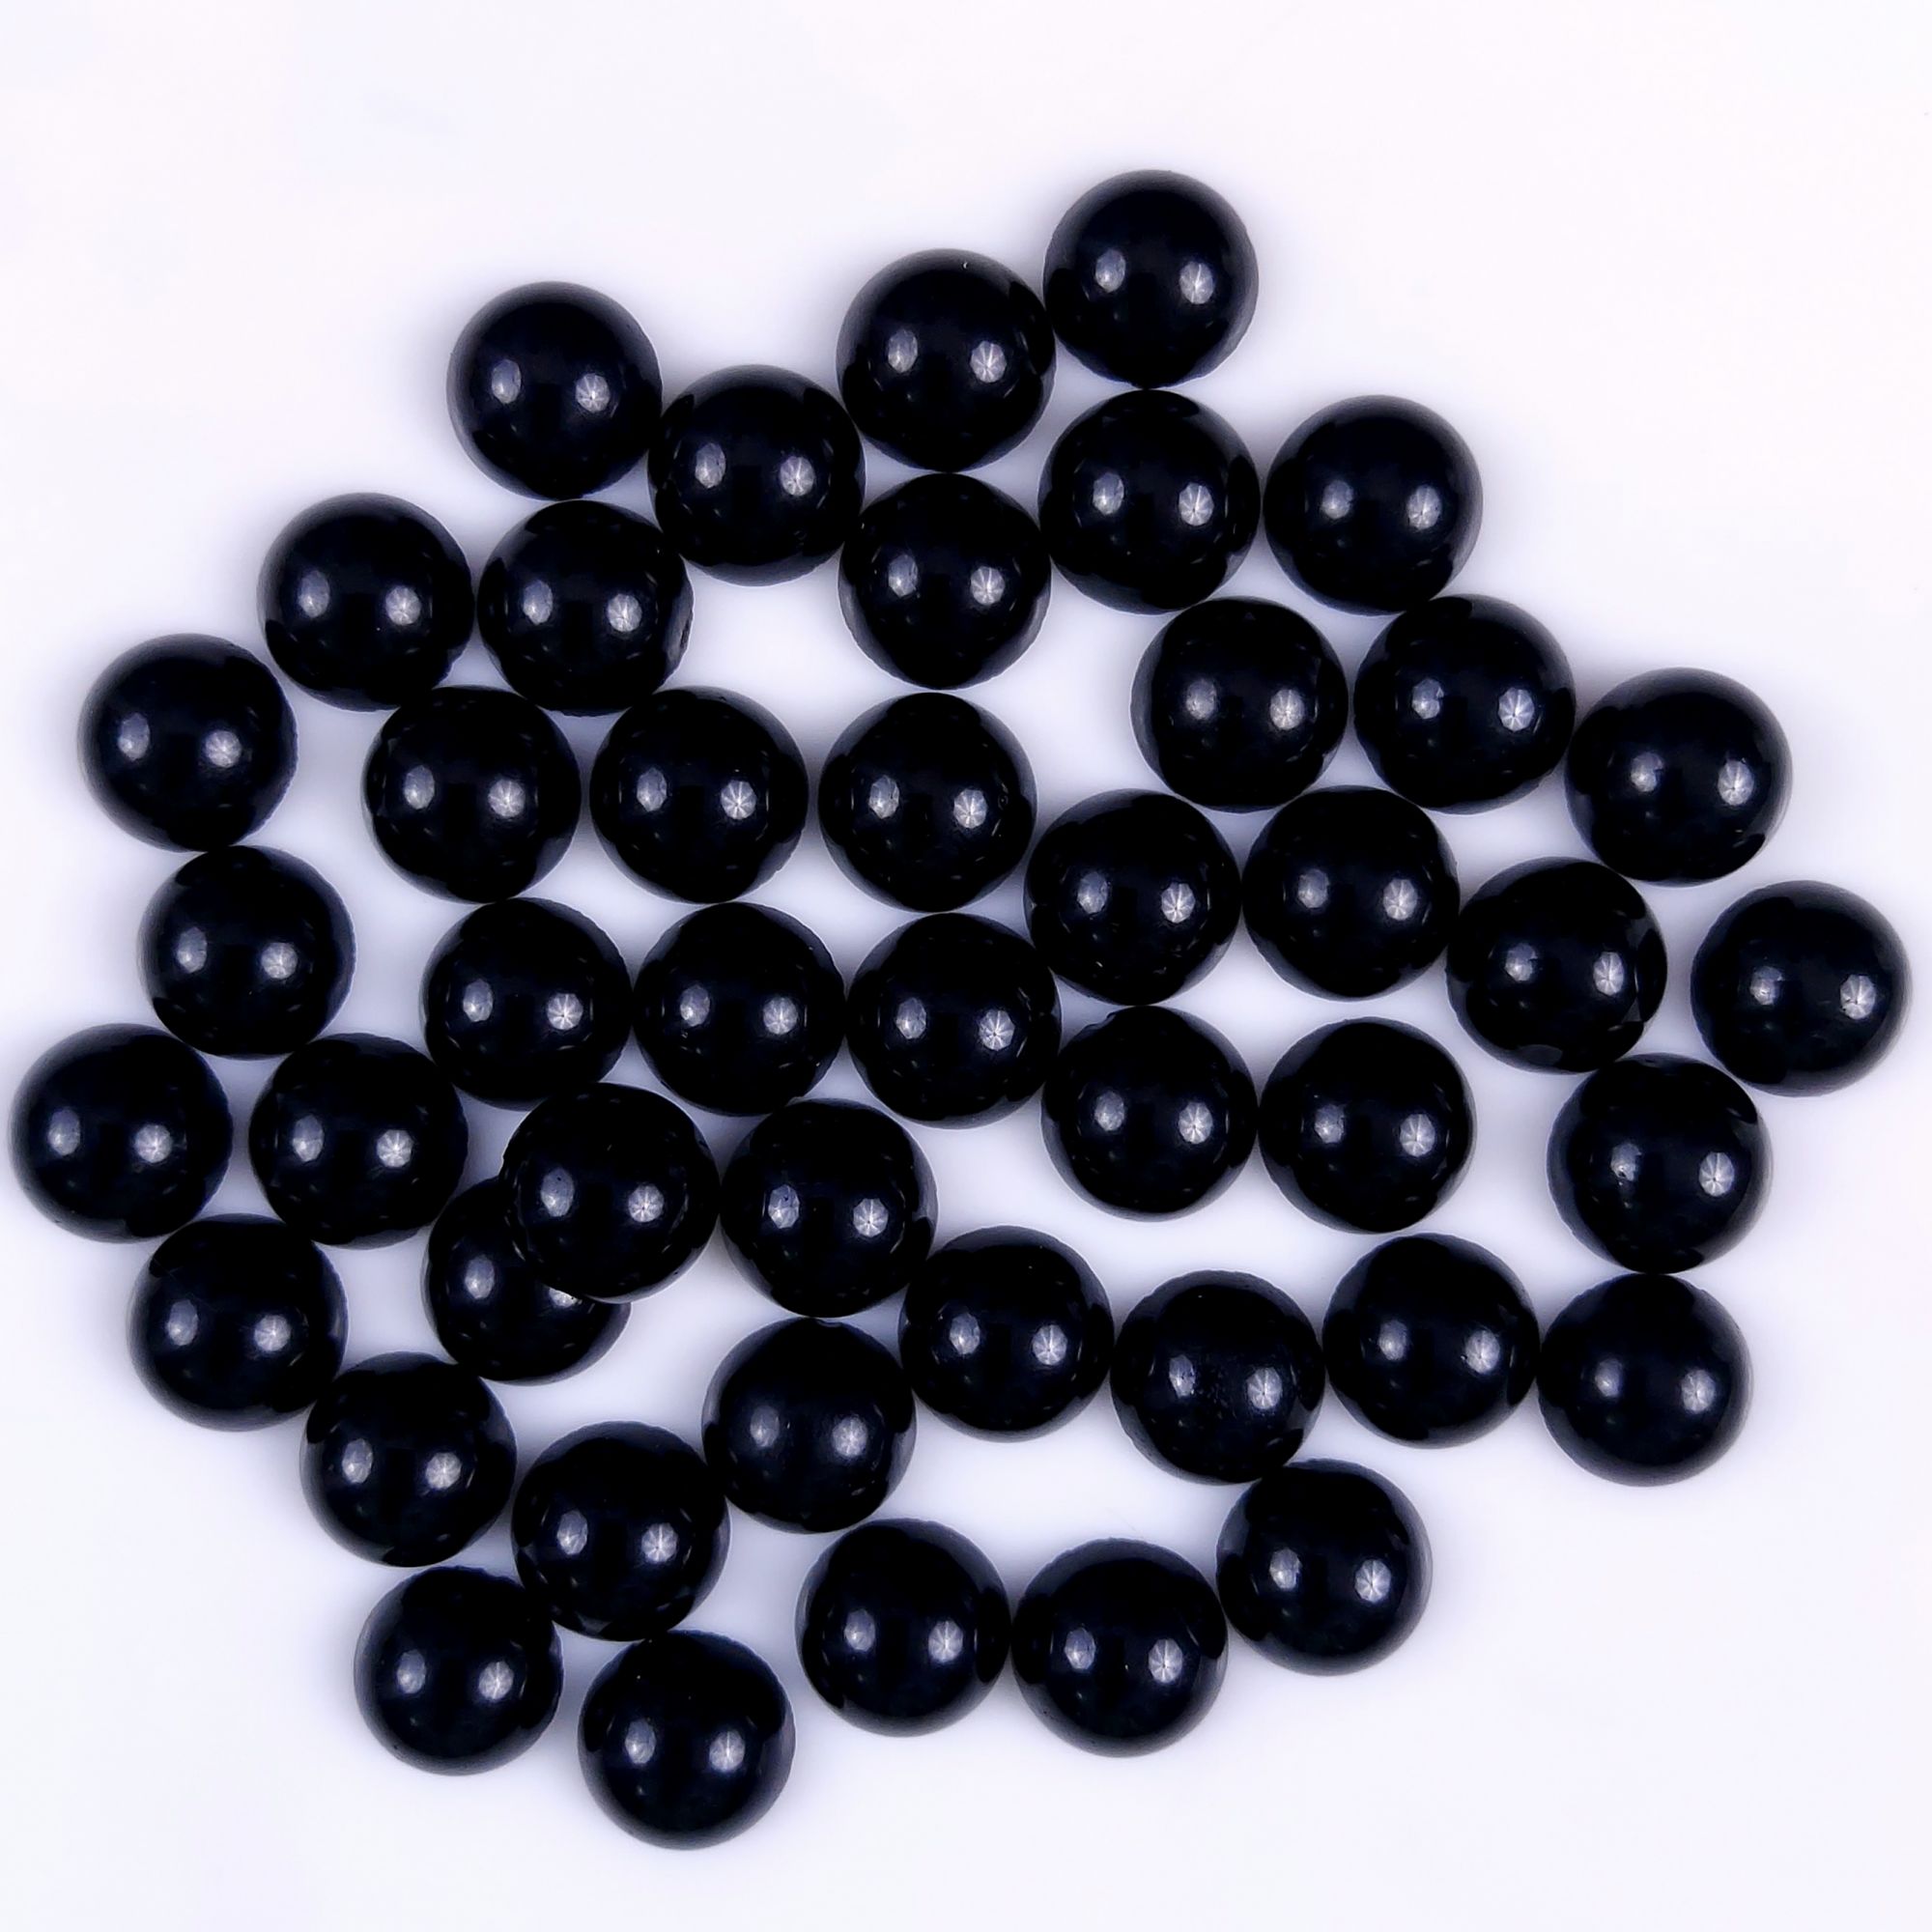 45Pcs 381Cts Natural Black Onyx Round Calibrated Size Cabochon Back Unpolished Cabochon Gemstone For Jewelry Making Lot 11x11 11x11mm#G-303